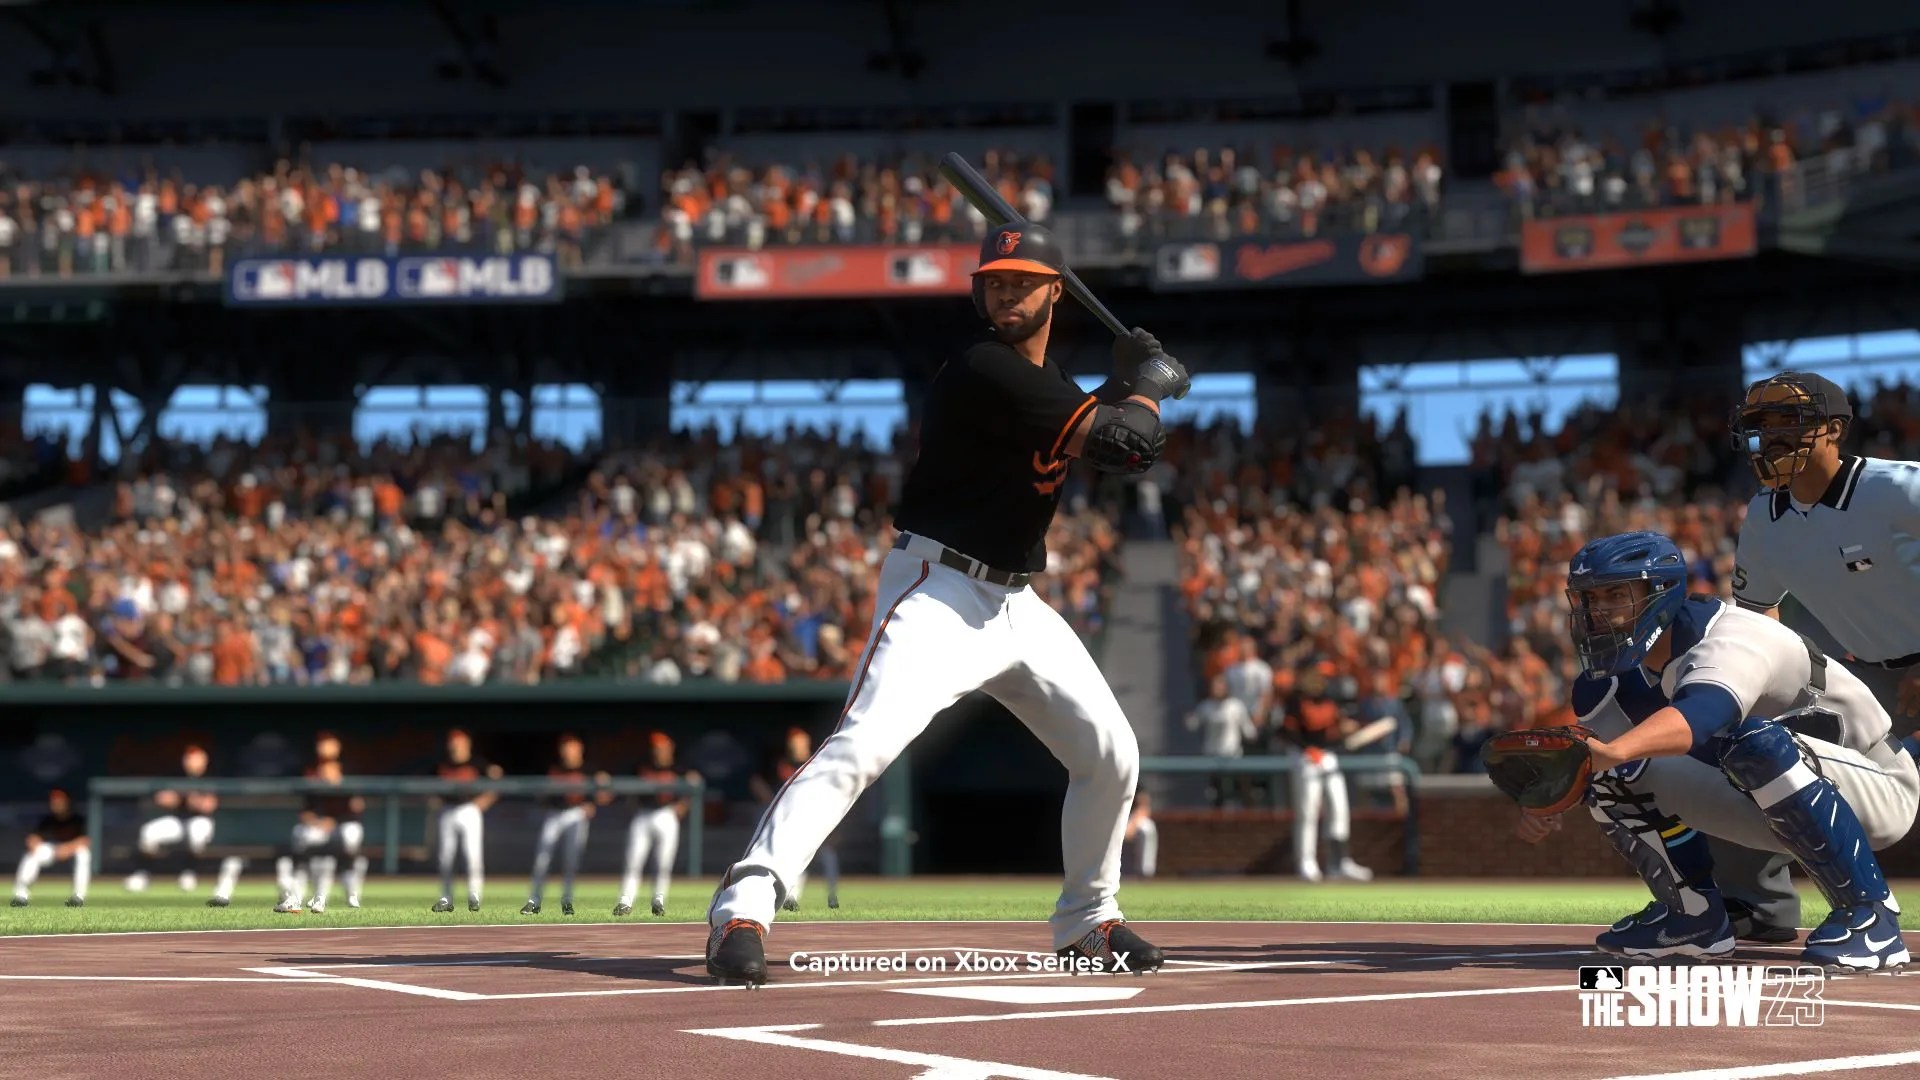 MLB: The Show 21 - Xbox One S Gameplay 